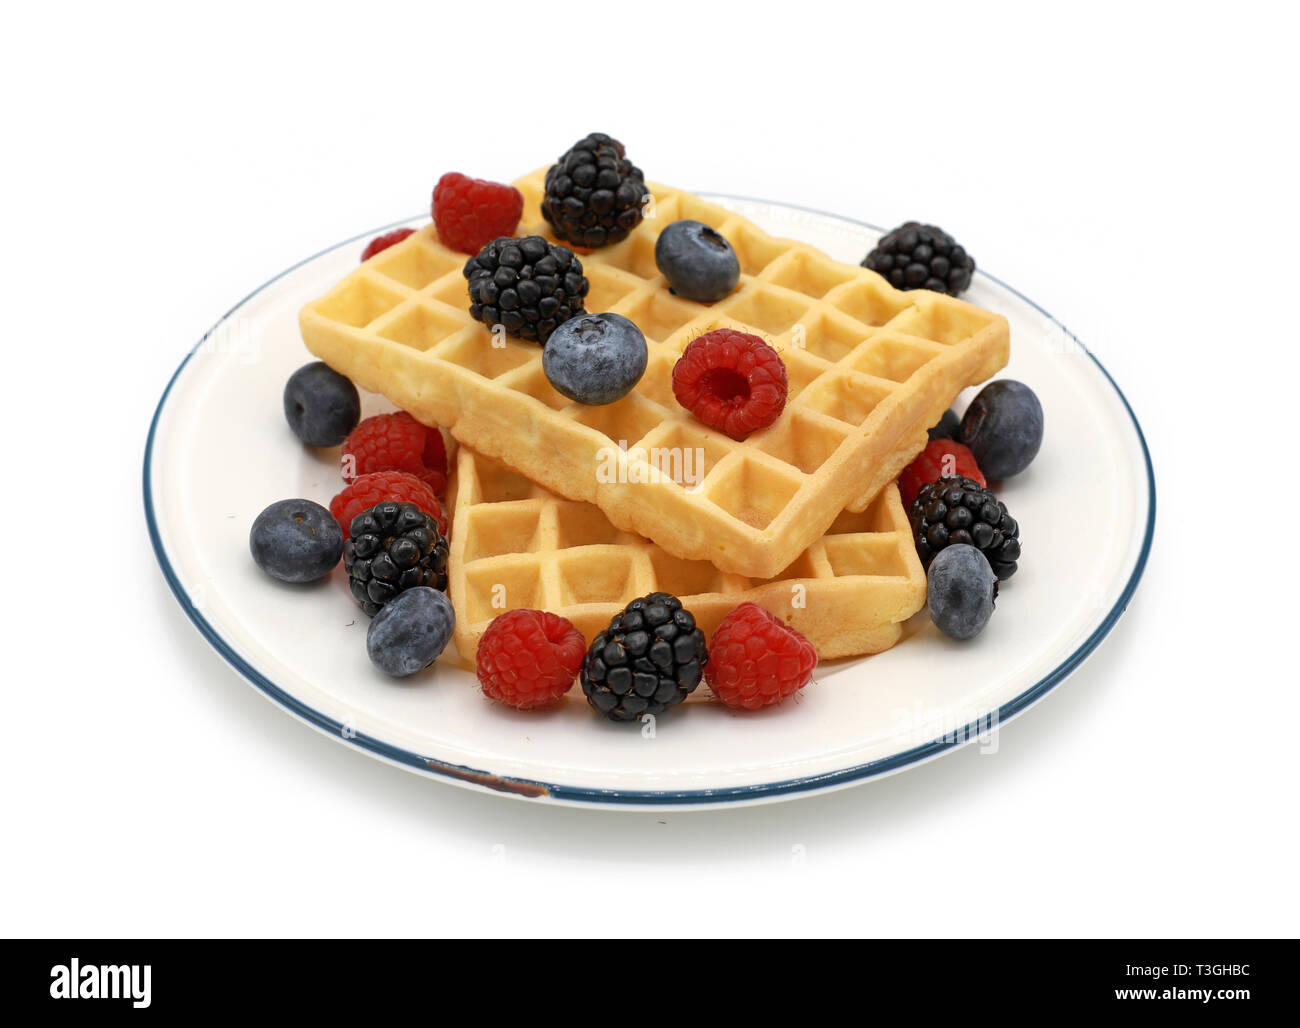 fresh belgian waffles with raspberrys and blackberries on a plate isolated on white background Stock Photo